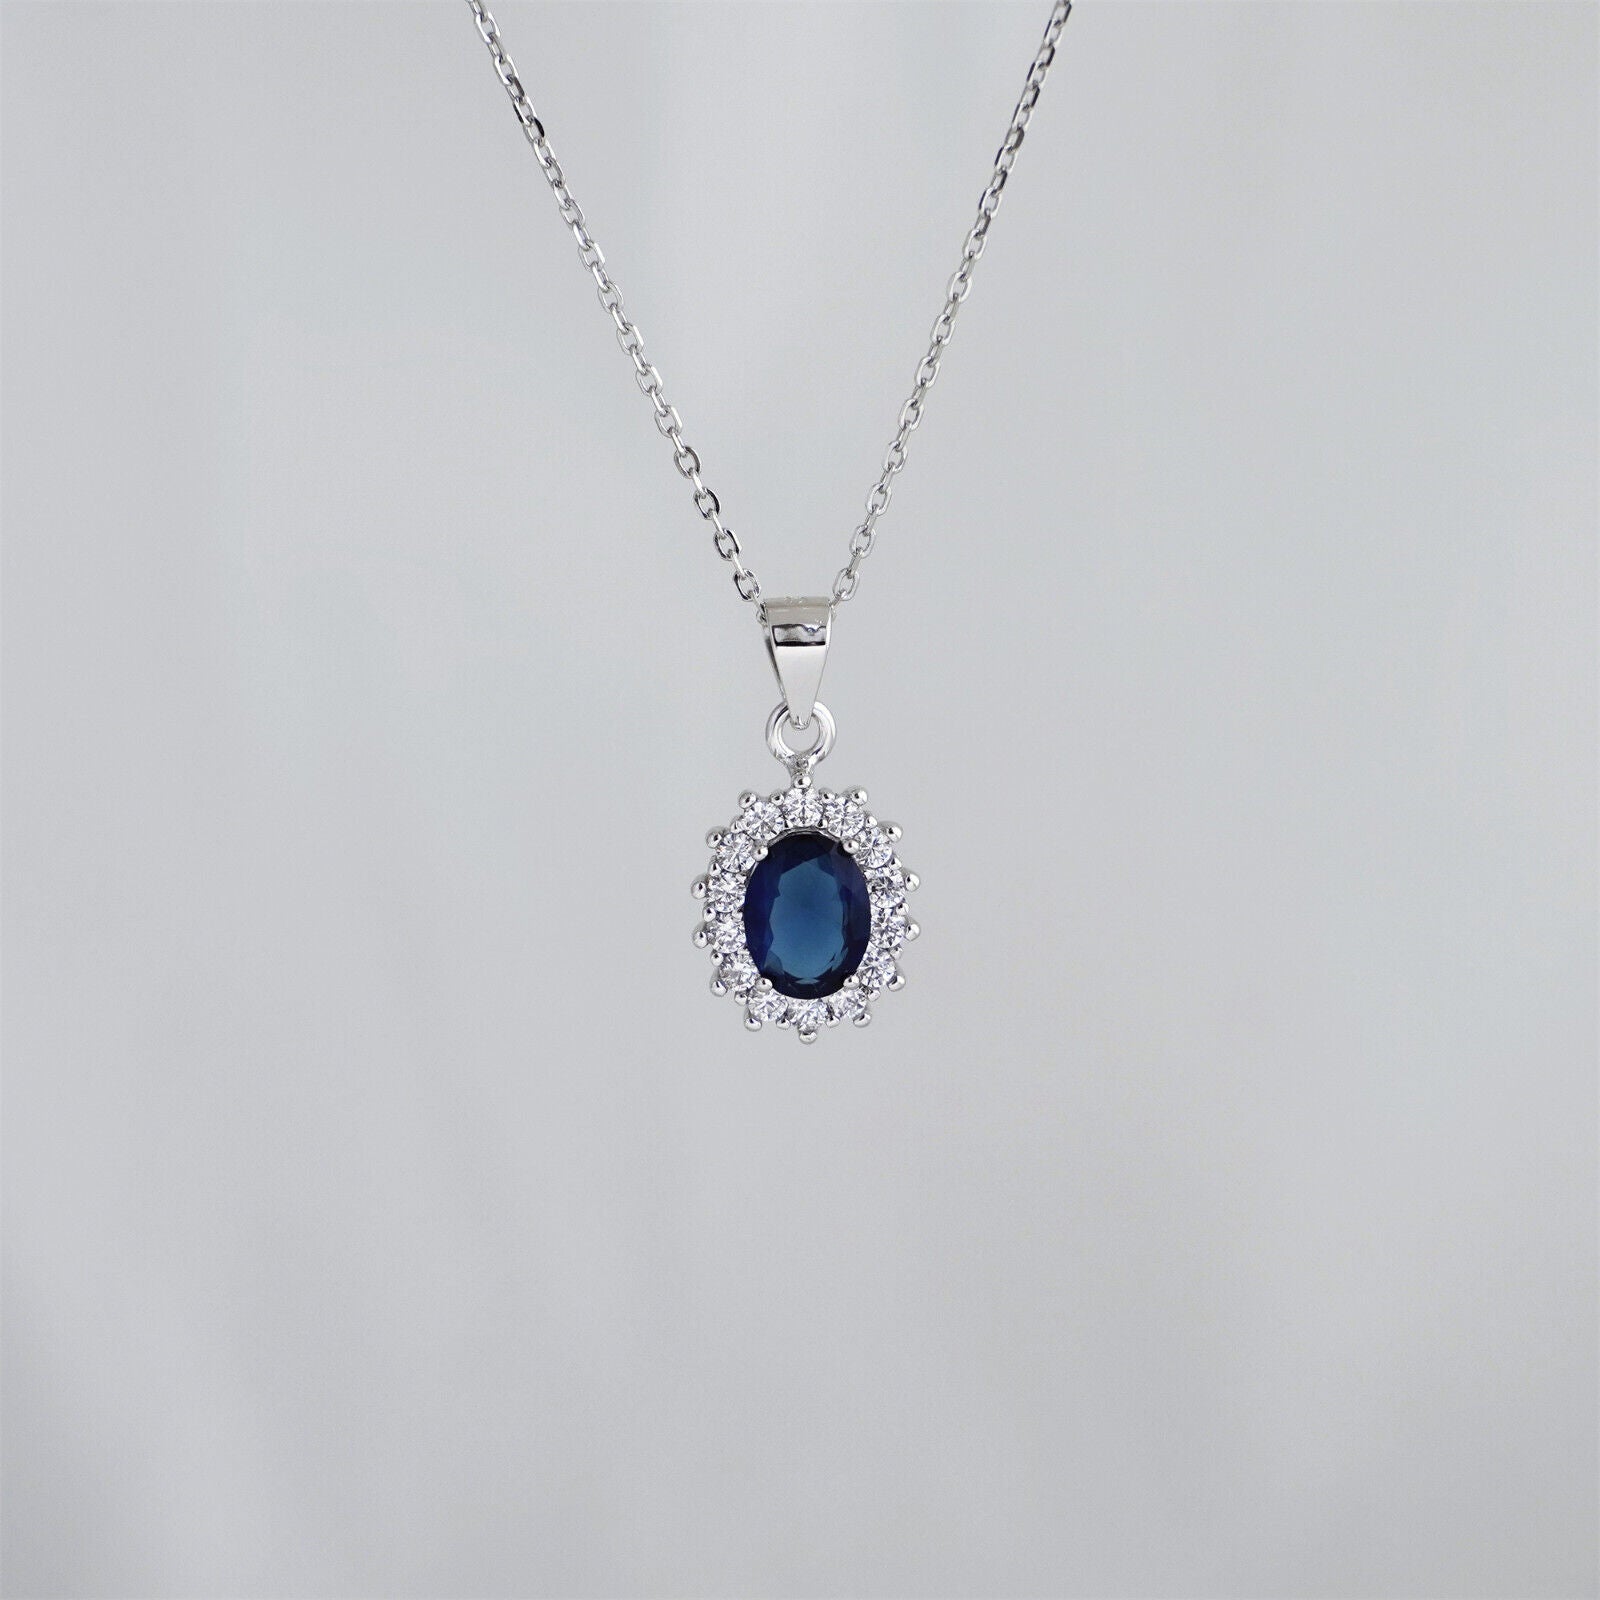 Stunning Blue CZ Sapphire Halo Cluster Pendant Necklace in Sterling Silver with 3 Chains - sugarkittenlondon